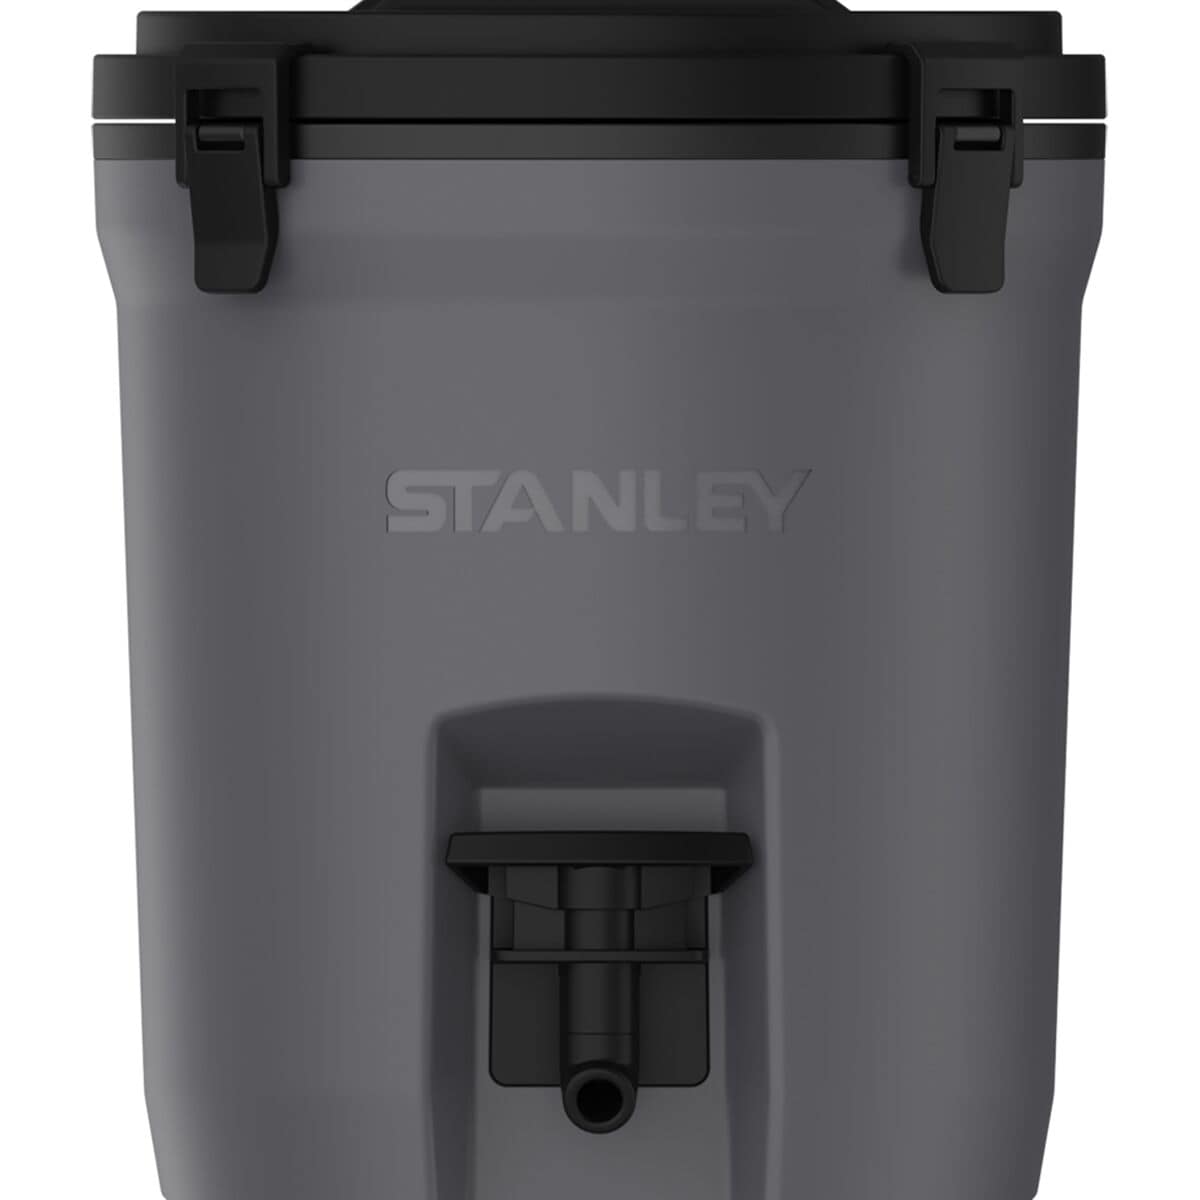 Stanley - If you've got big hydration goals, the Fast Flow Water Jug is  here for you. And new hue Cream looks so good, you'll want to invite it to  every backyard